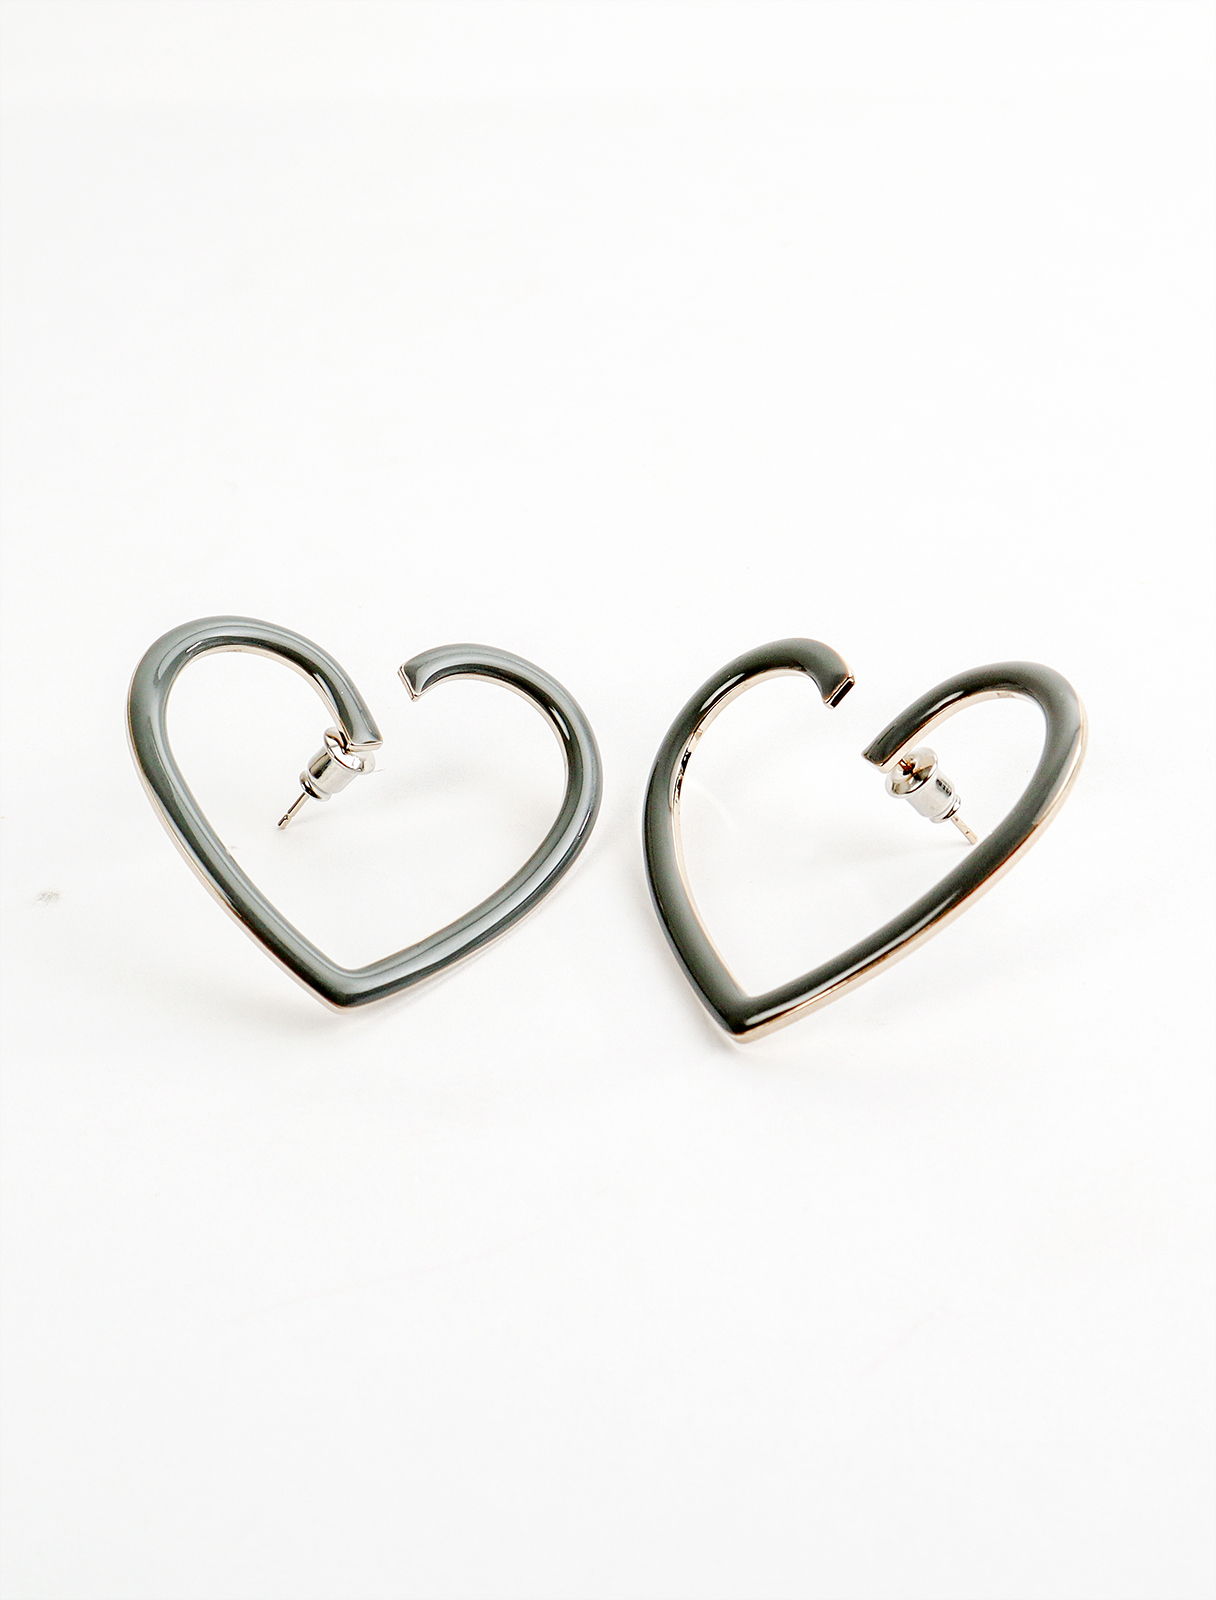 Earrings with a large gray heart design